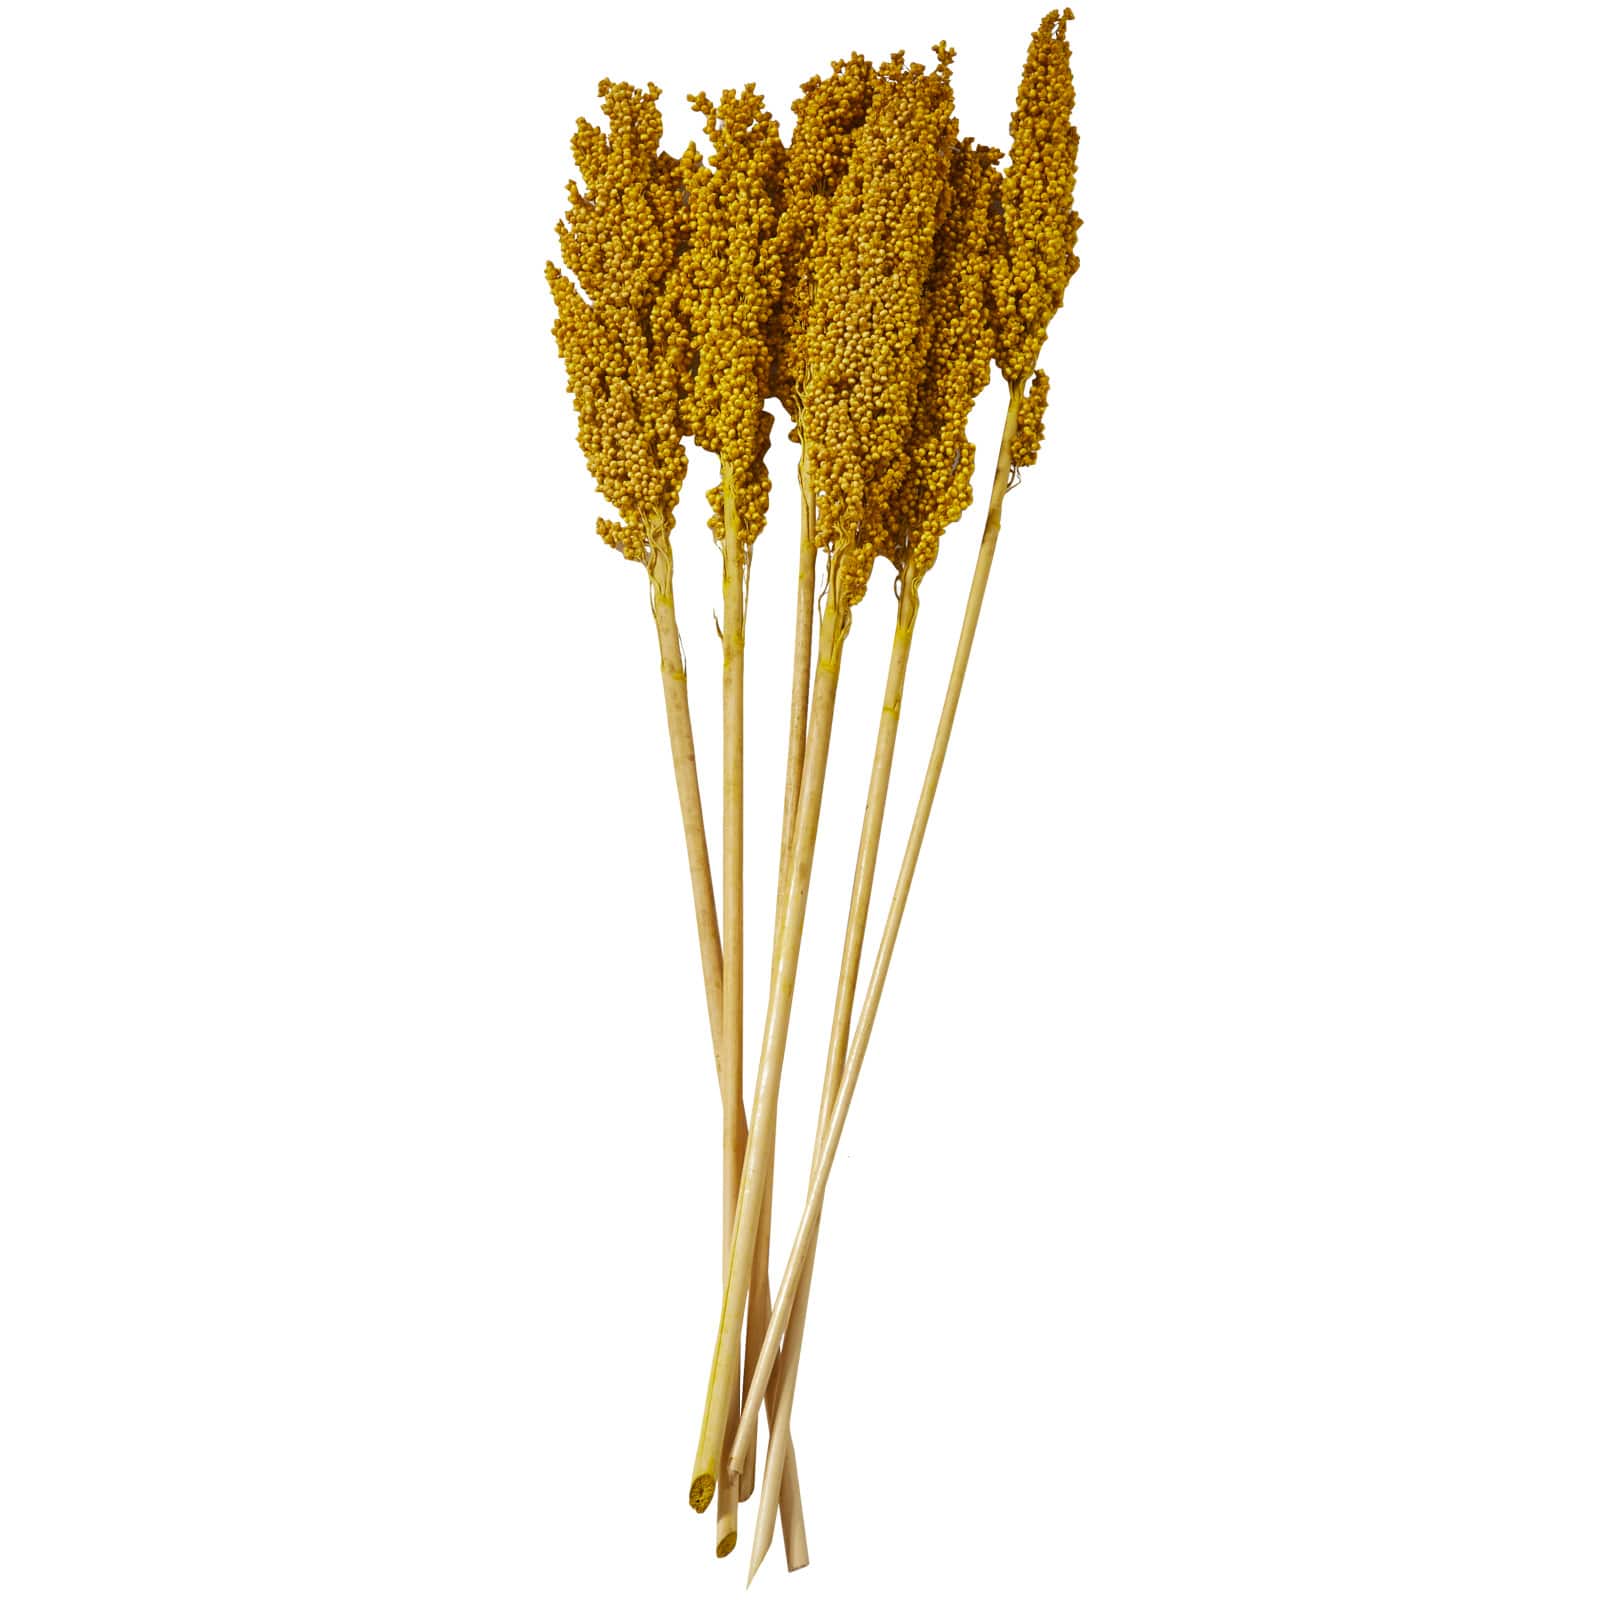 Dried Corn Maize Natural Foliage with Long Stems